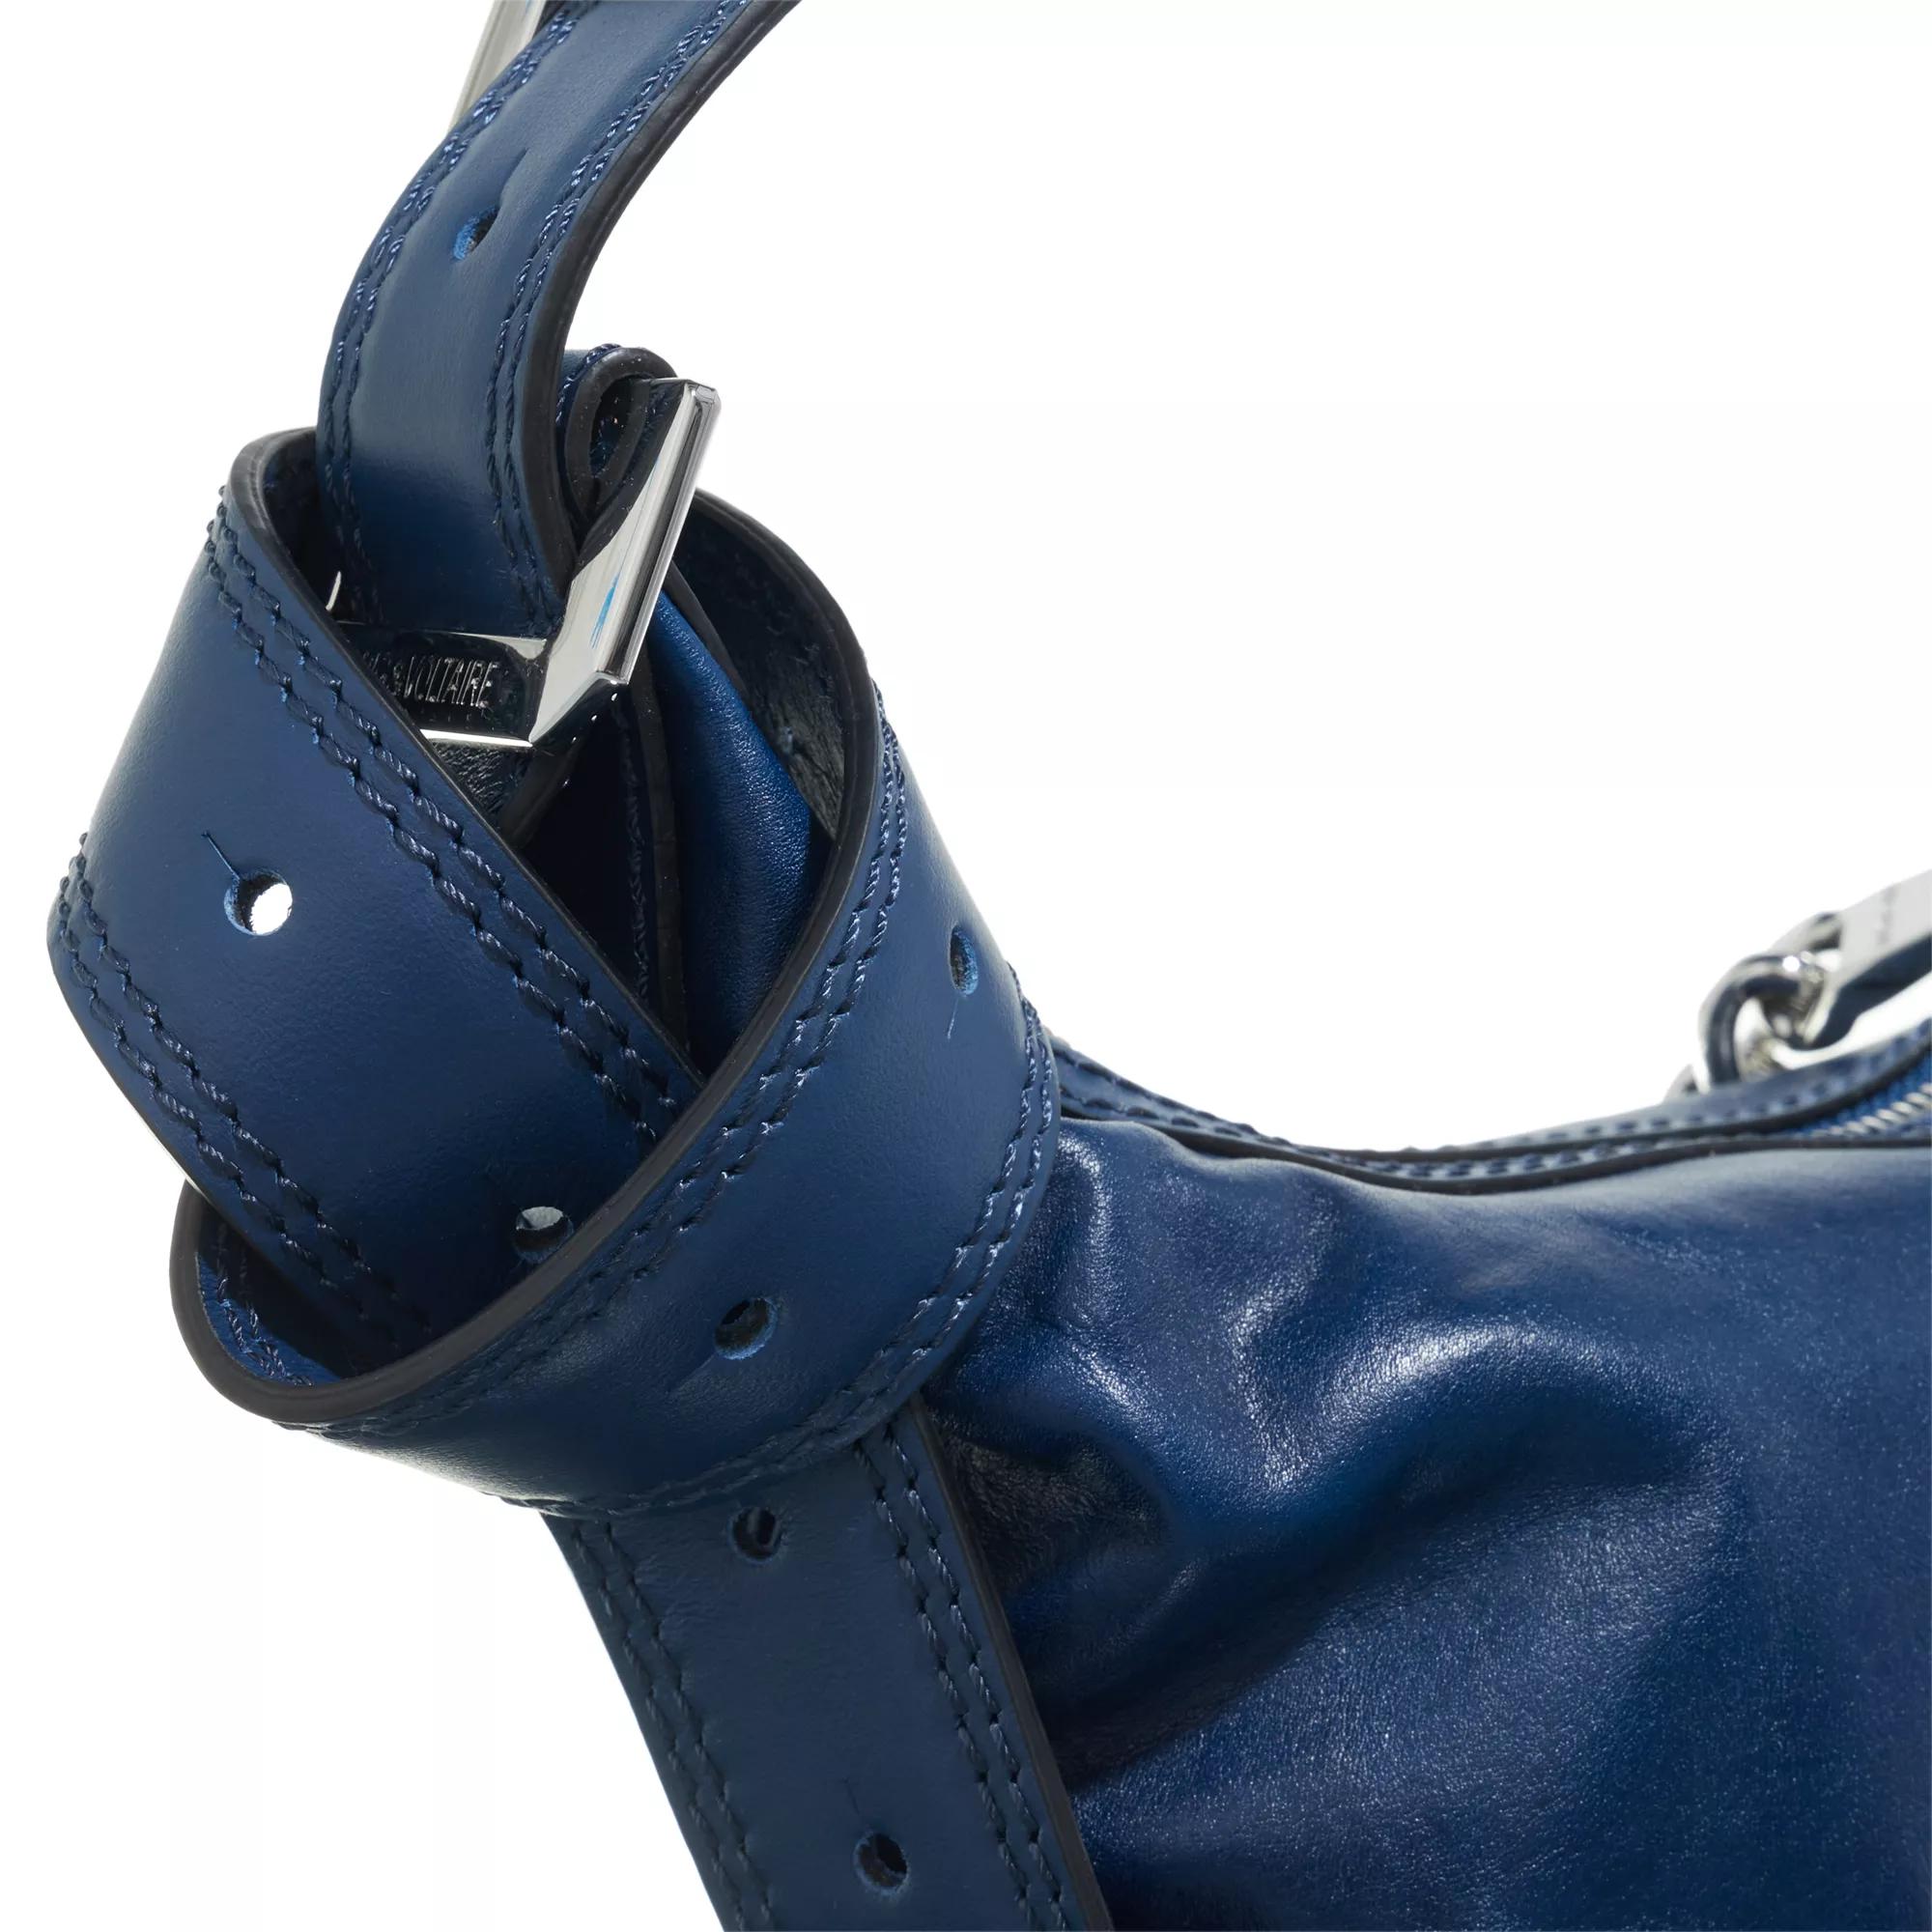 Zadig & Voltaire Hobo bags Le Cecilia Xs Leather With Veg in blauw